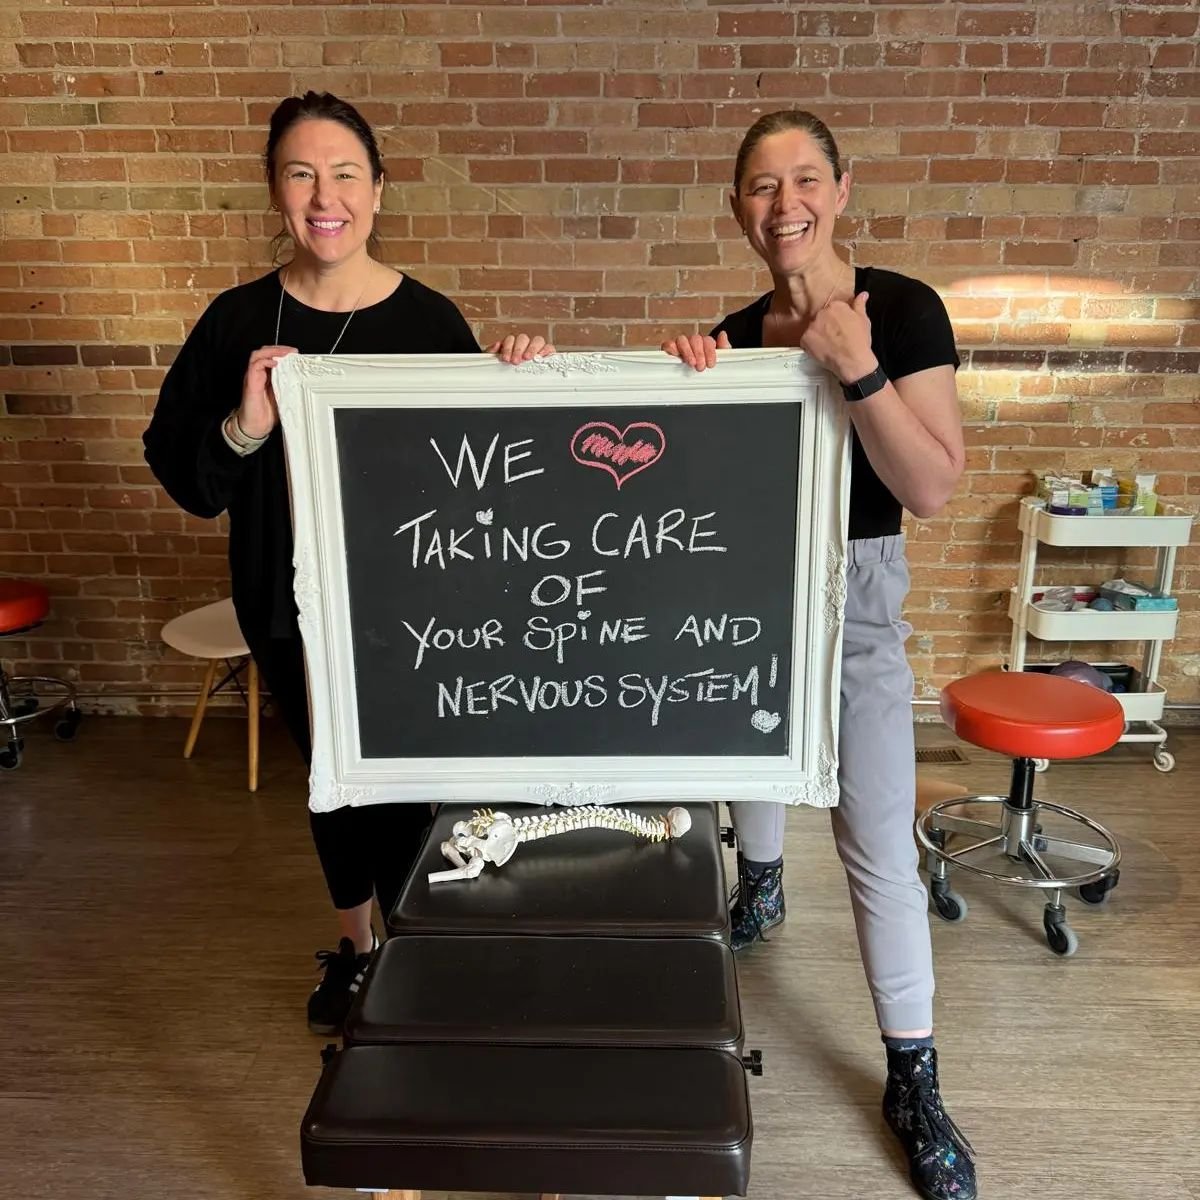 These happy faces love seeing you!

What a joy it's been to be part of the Riverside community for the past 20 years! We are so honoured to be part of your health journey and how much you have trusted us with your care. @adrienne_mcruvie and @dr.sonj